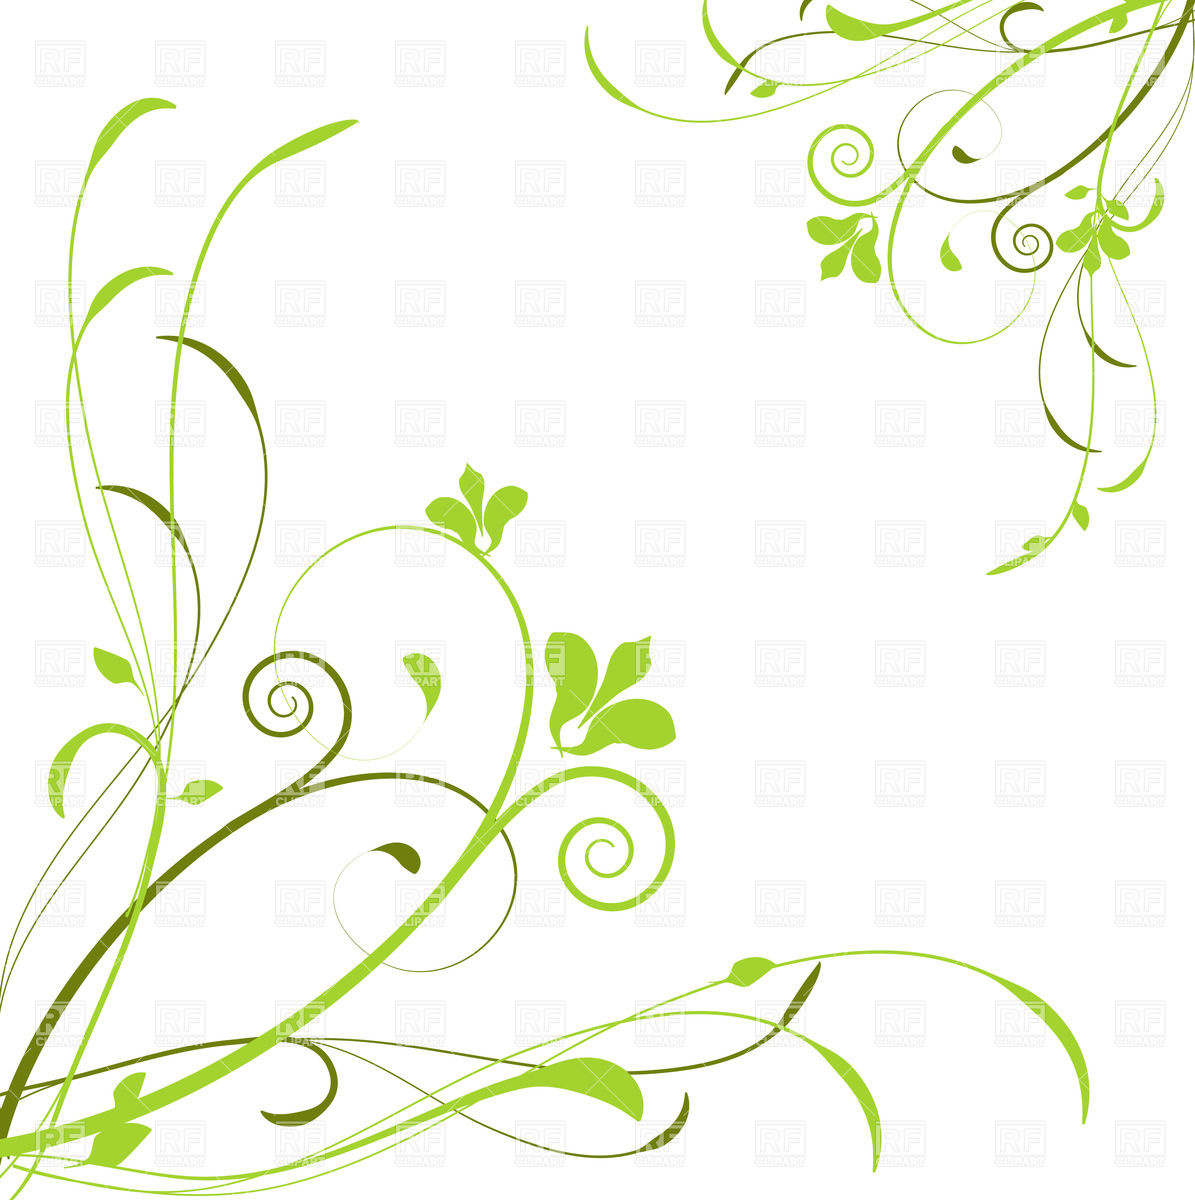 23752 Plants And Animals Download Royalty Free Vector Clipart  Eps